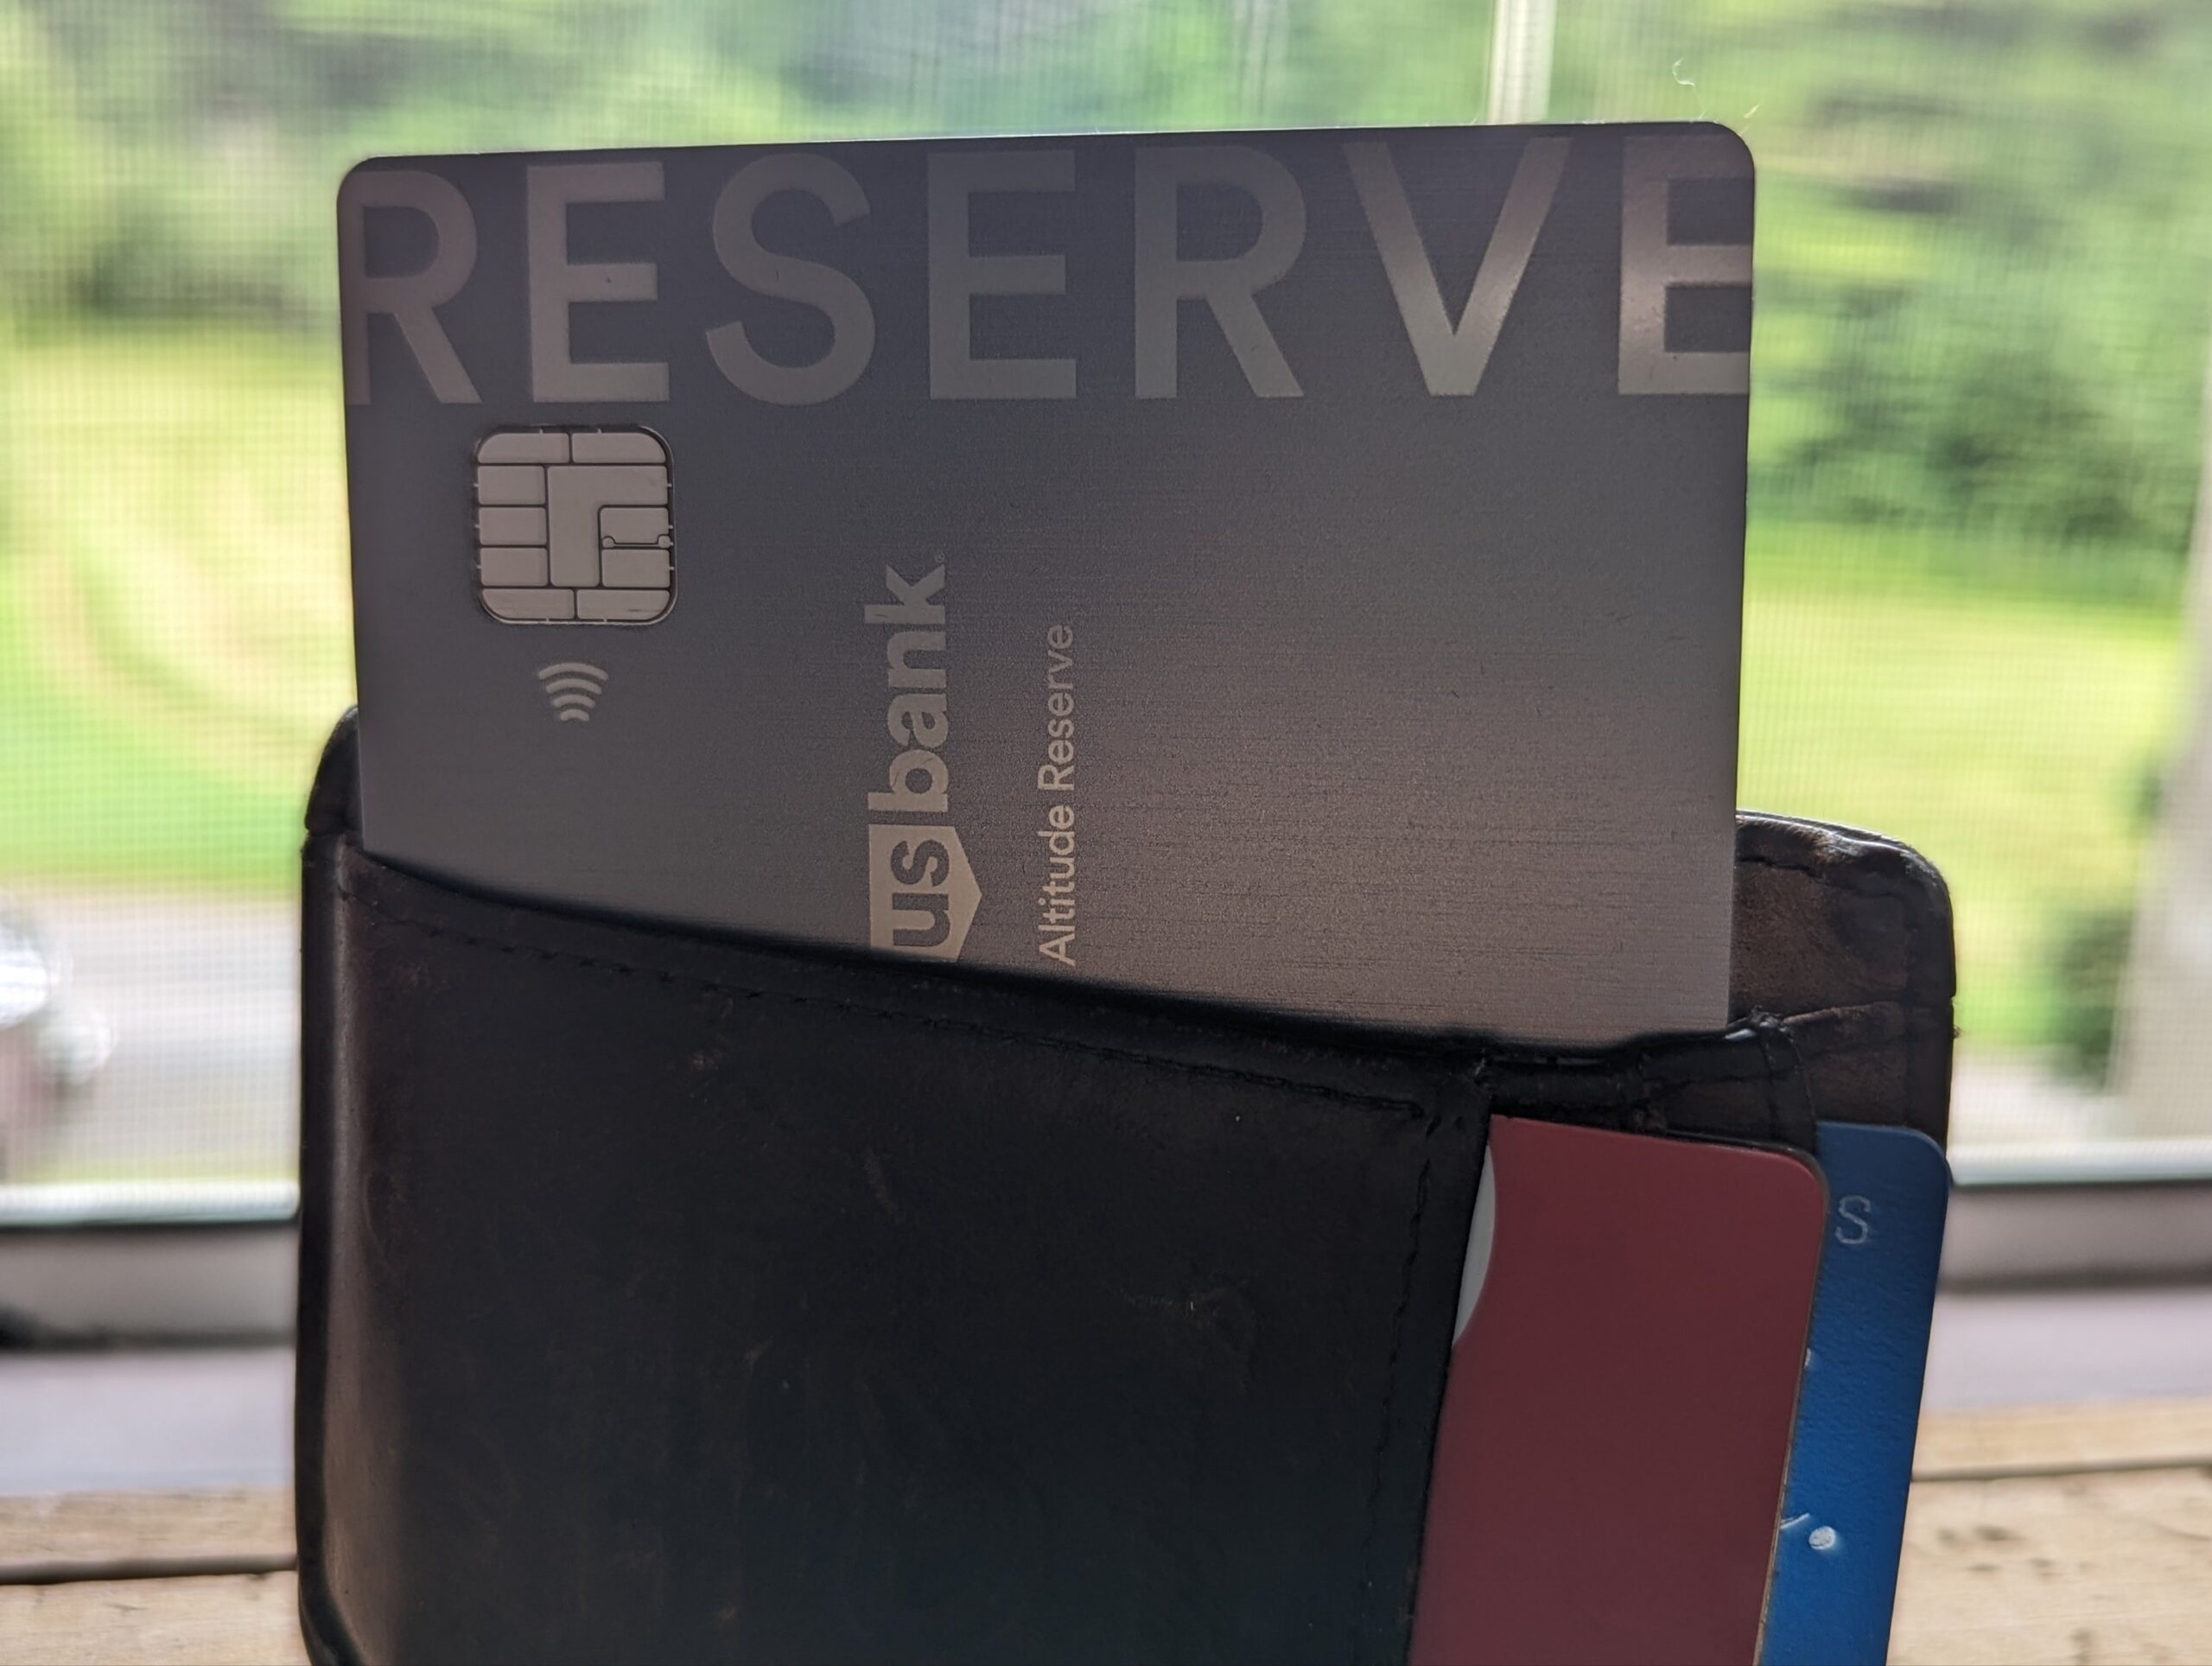 Google Pay working for some, but not others, for US Bank Altitude Reserve 3x mobile payments